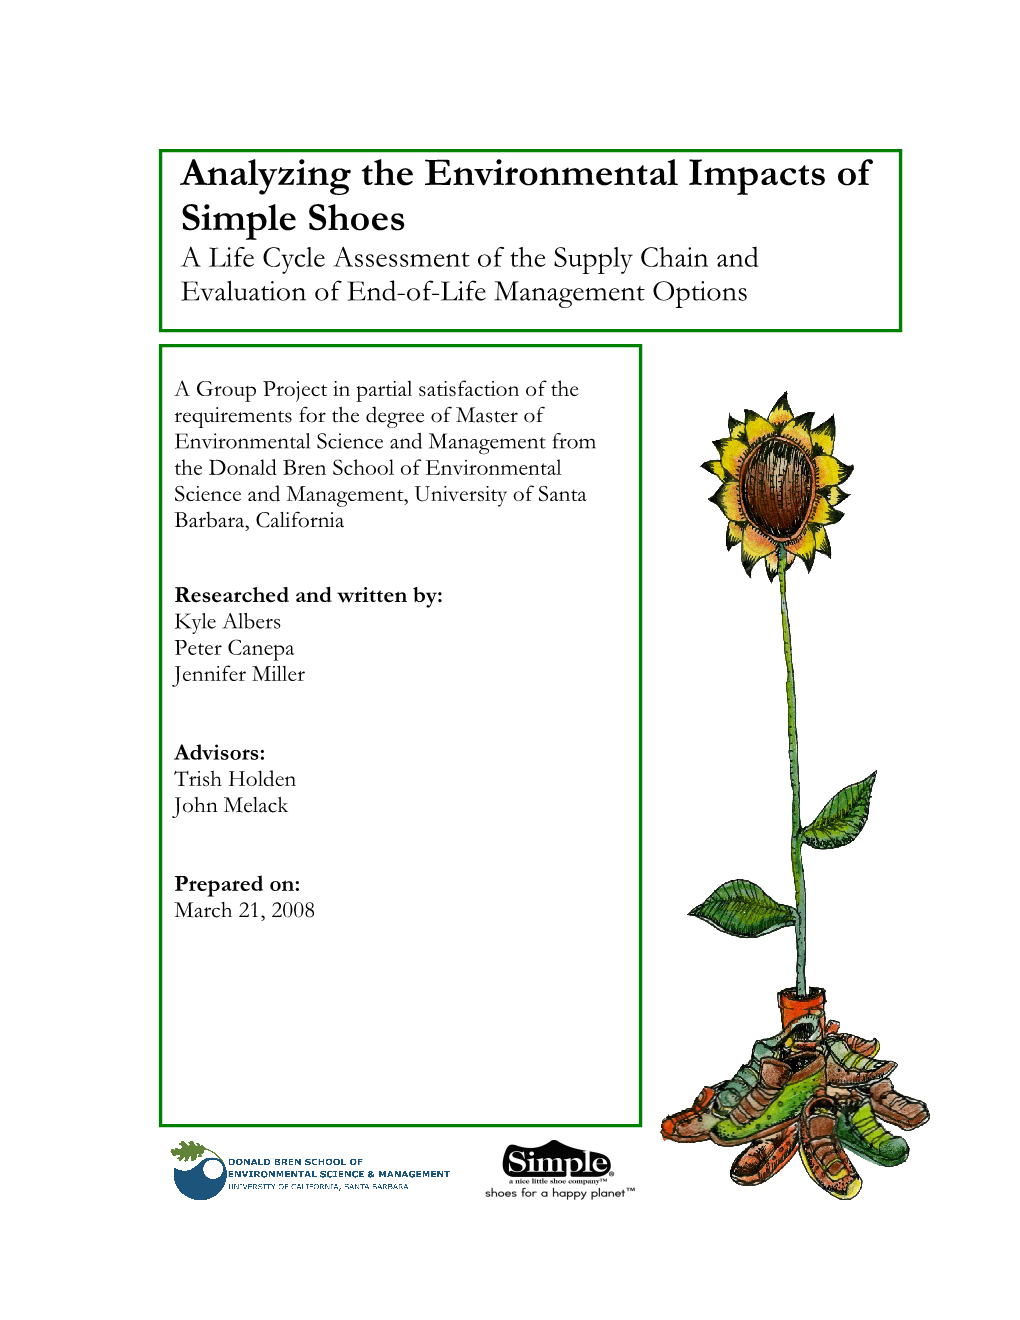 Analyzing the Environmental Impacts of Simple Shoes a Life Cycle Assessment of the Supply Chain and Evaluation of End-Of-Life Management Options